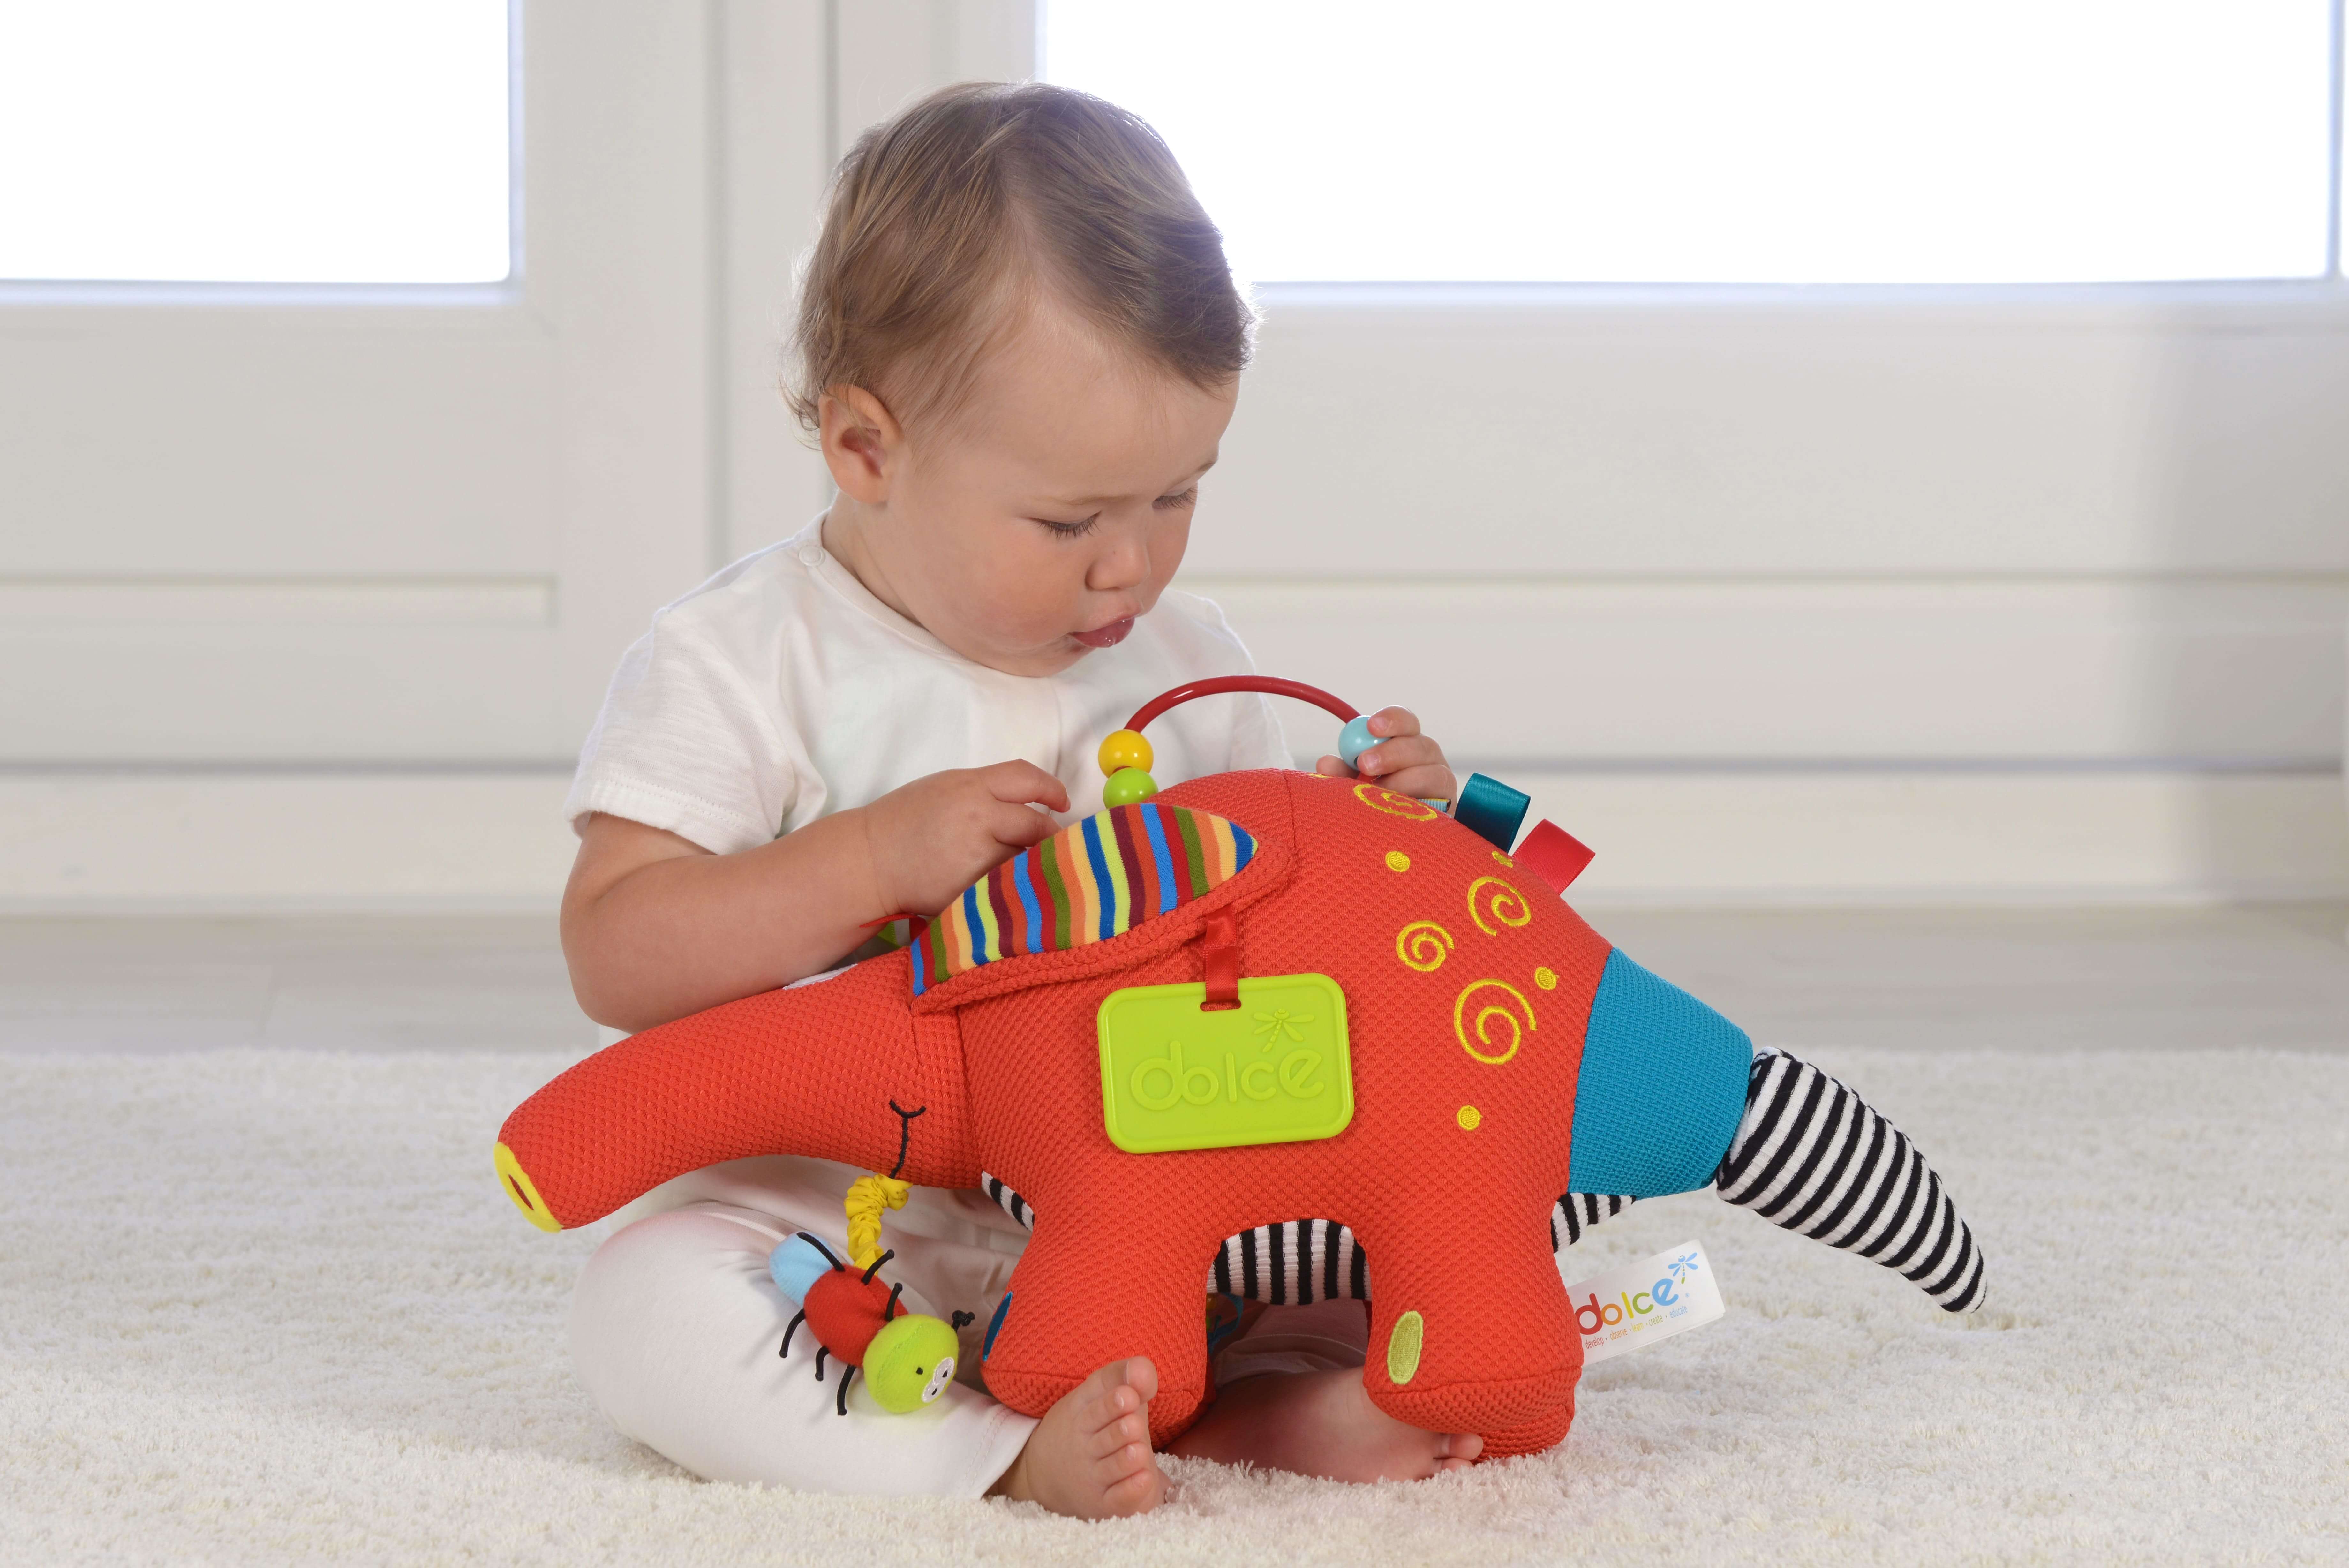 Best Baby Development Toys 2016: A Guide to Buying the Right Toy for Your Little One